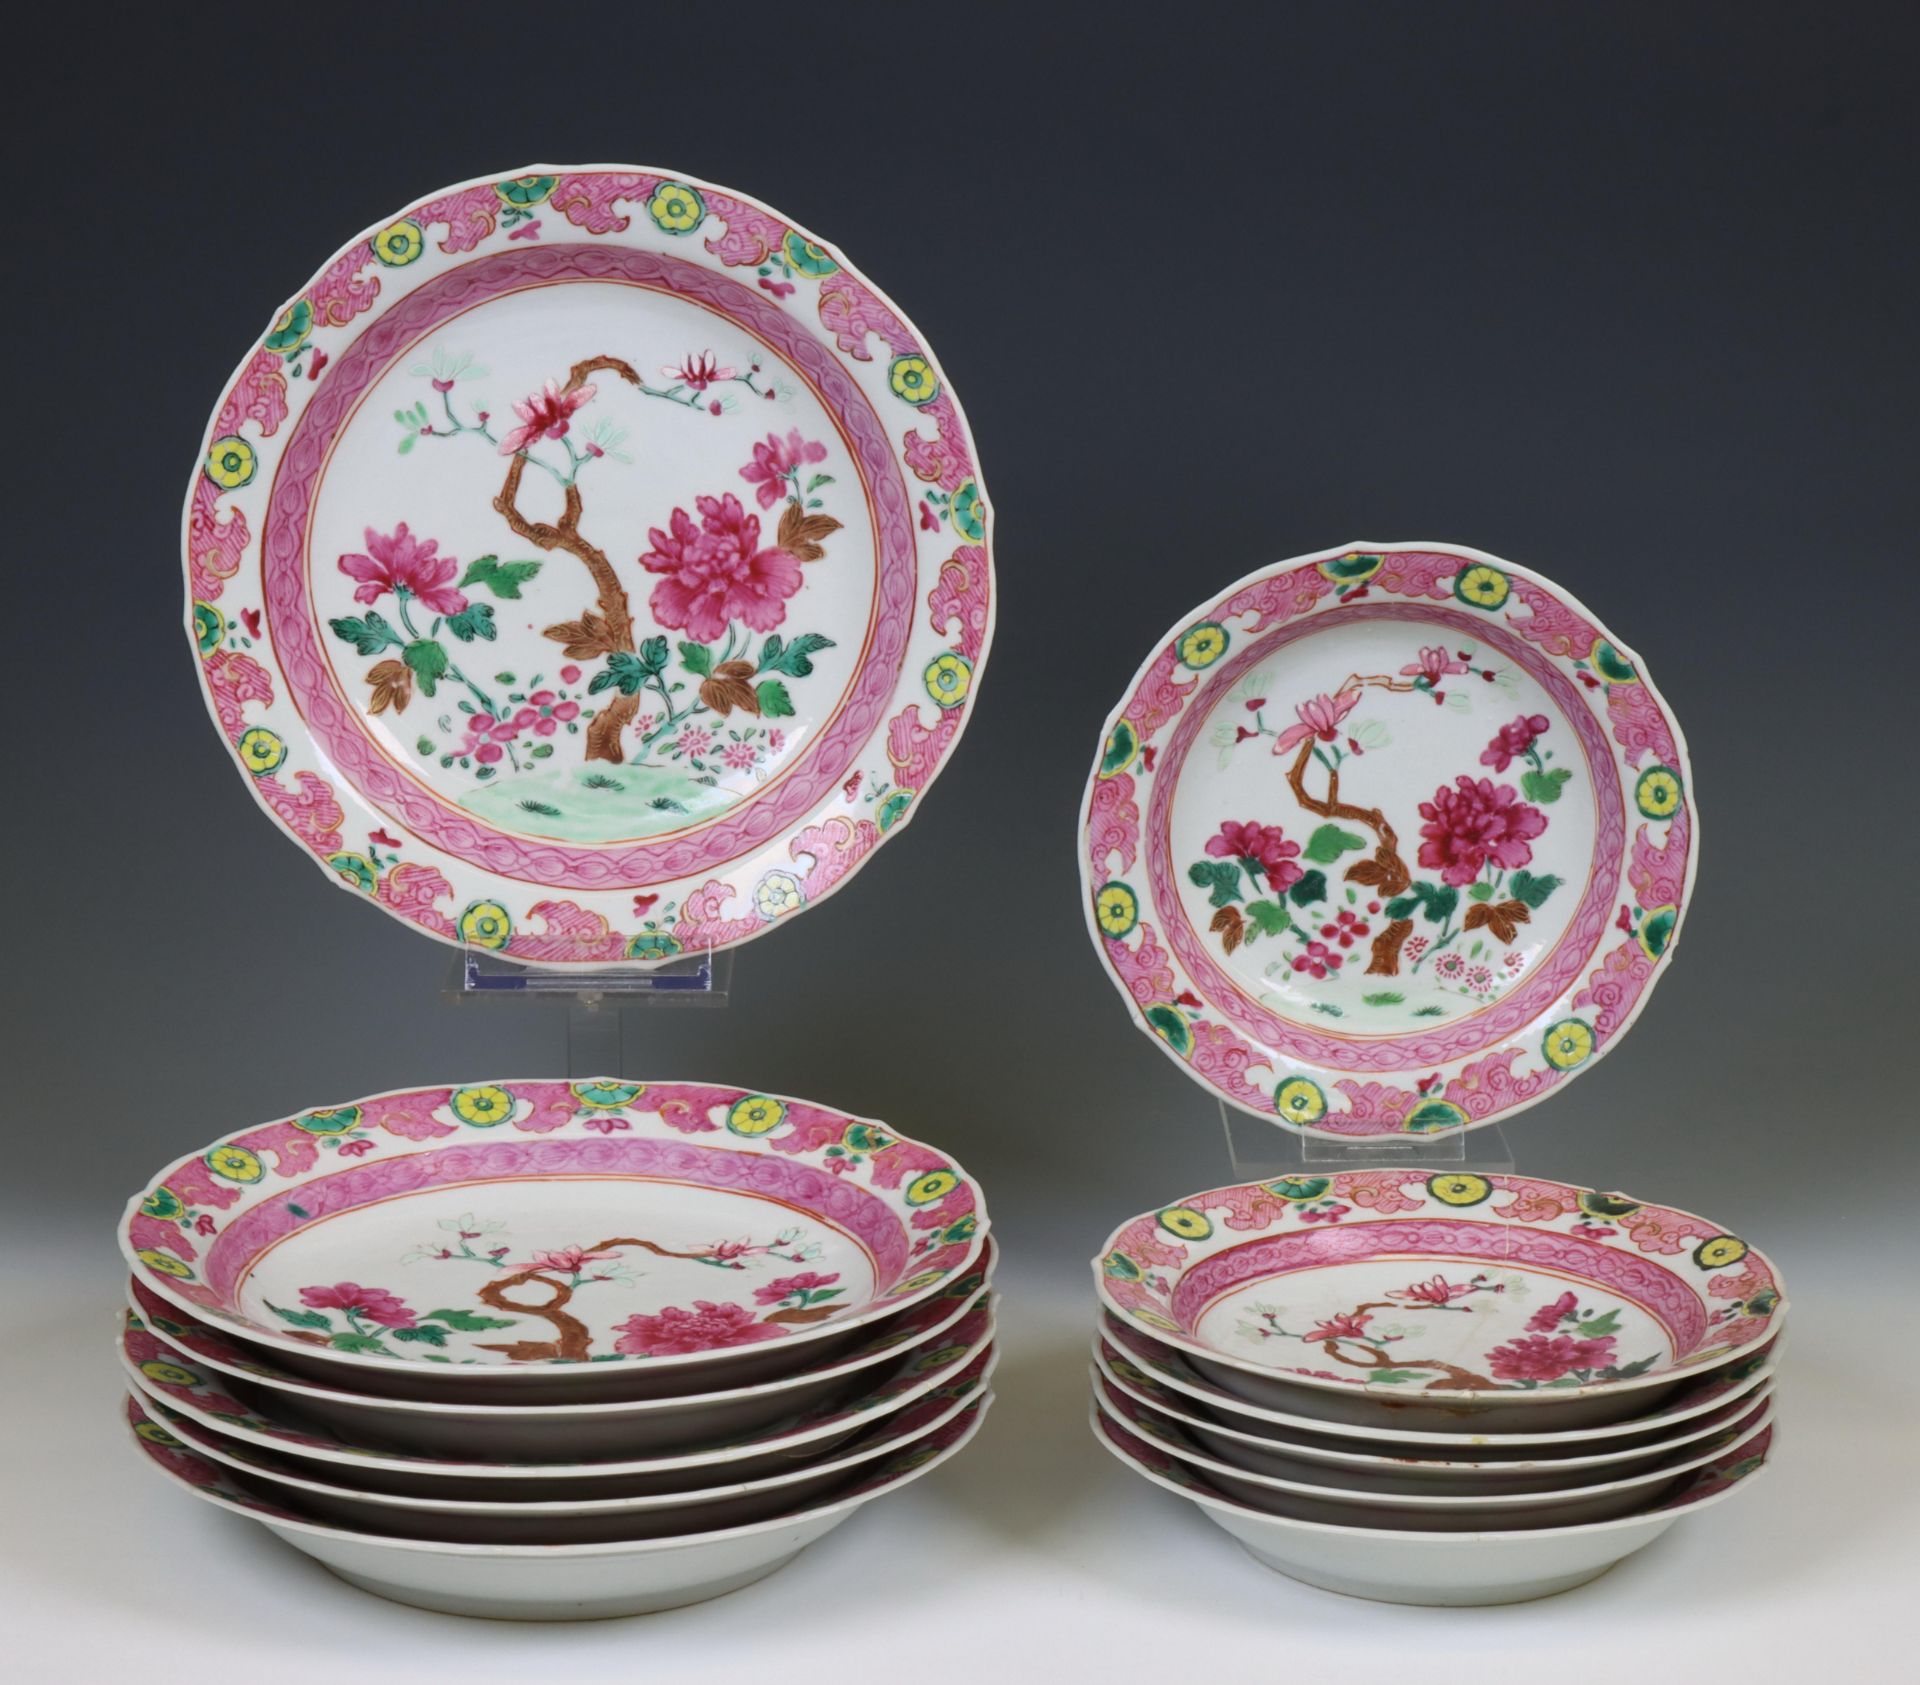 China, two sets of six famille rose porcelain deep dishes, late Qing dynasty (1644-1912),